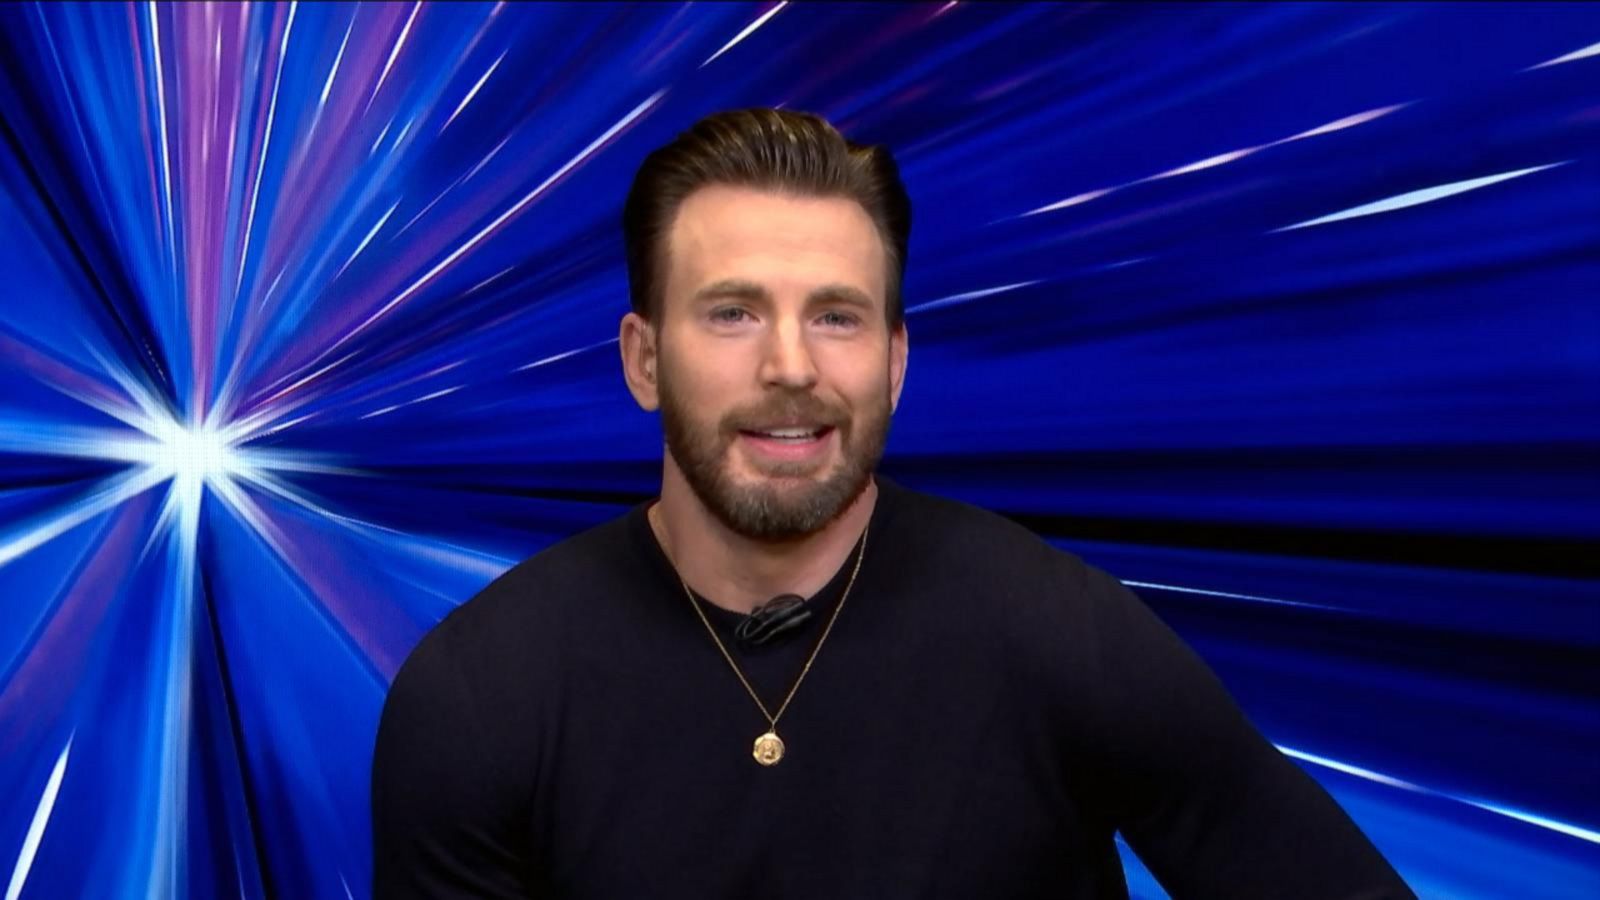 220+ Chris Evans HD Wallpapers and Backgrounds